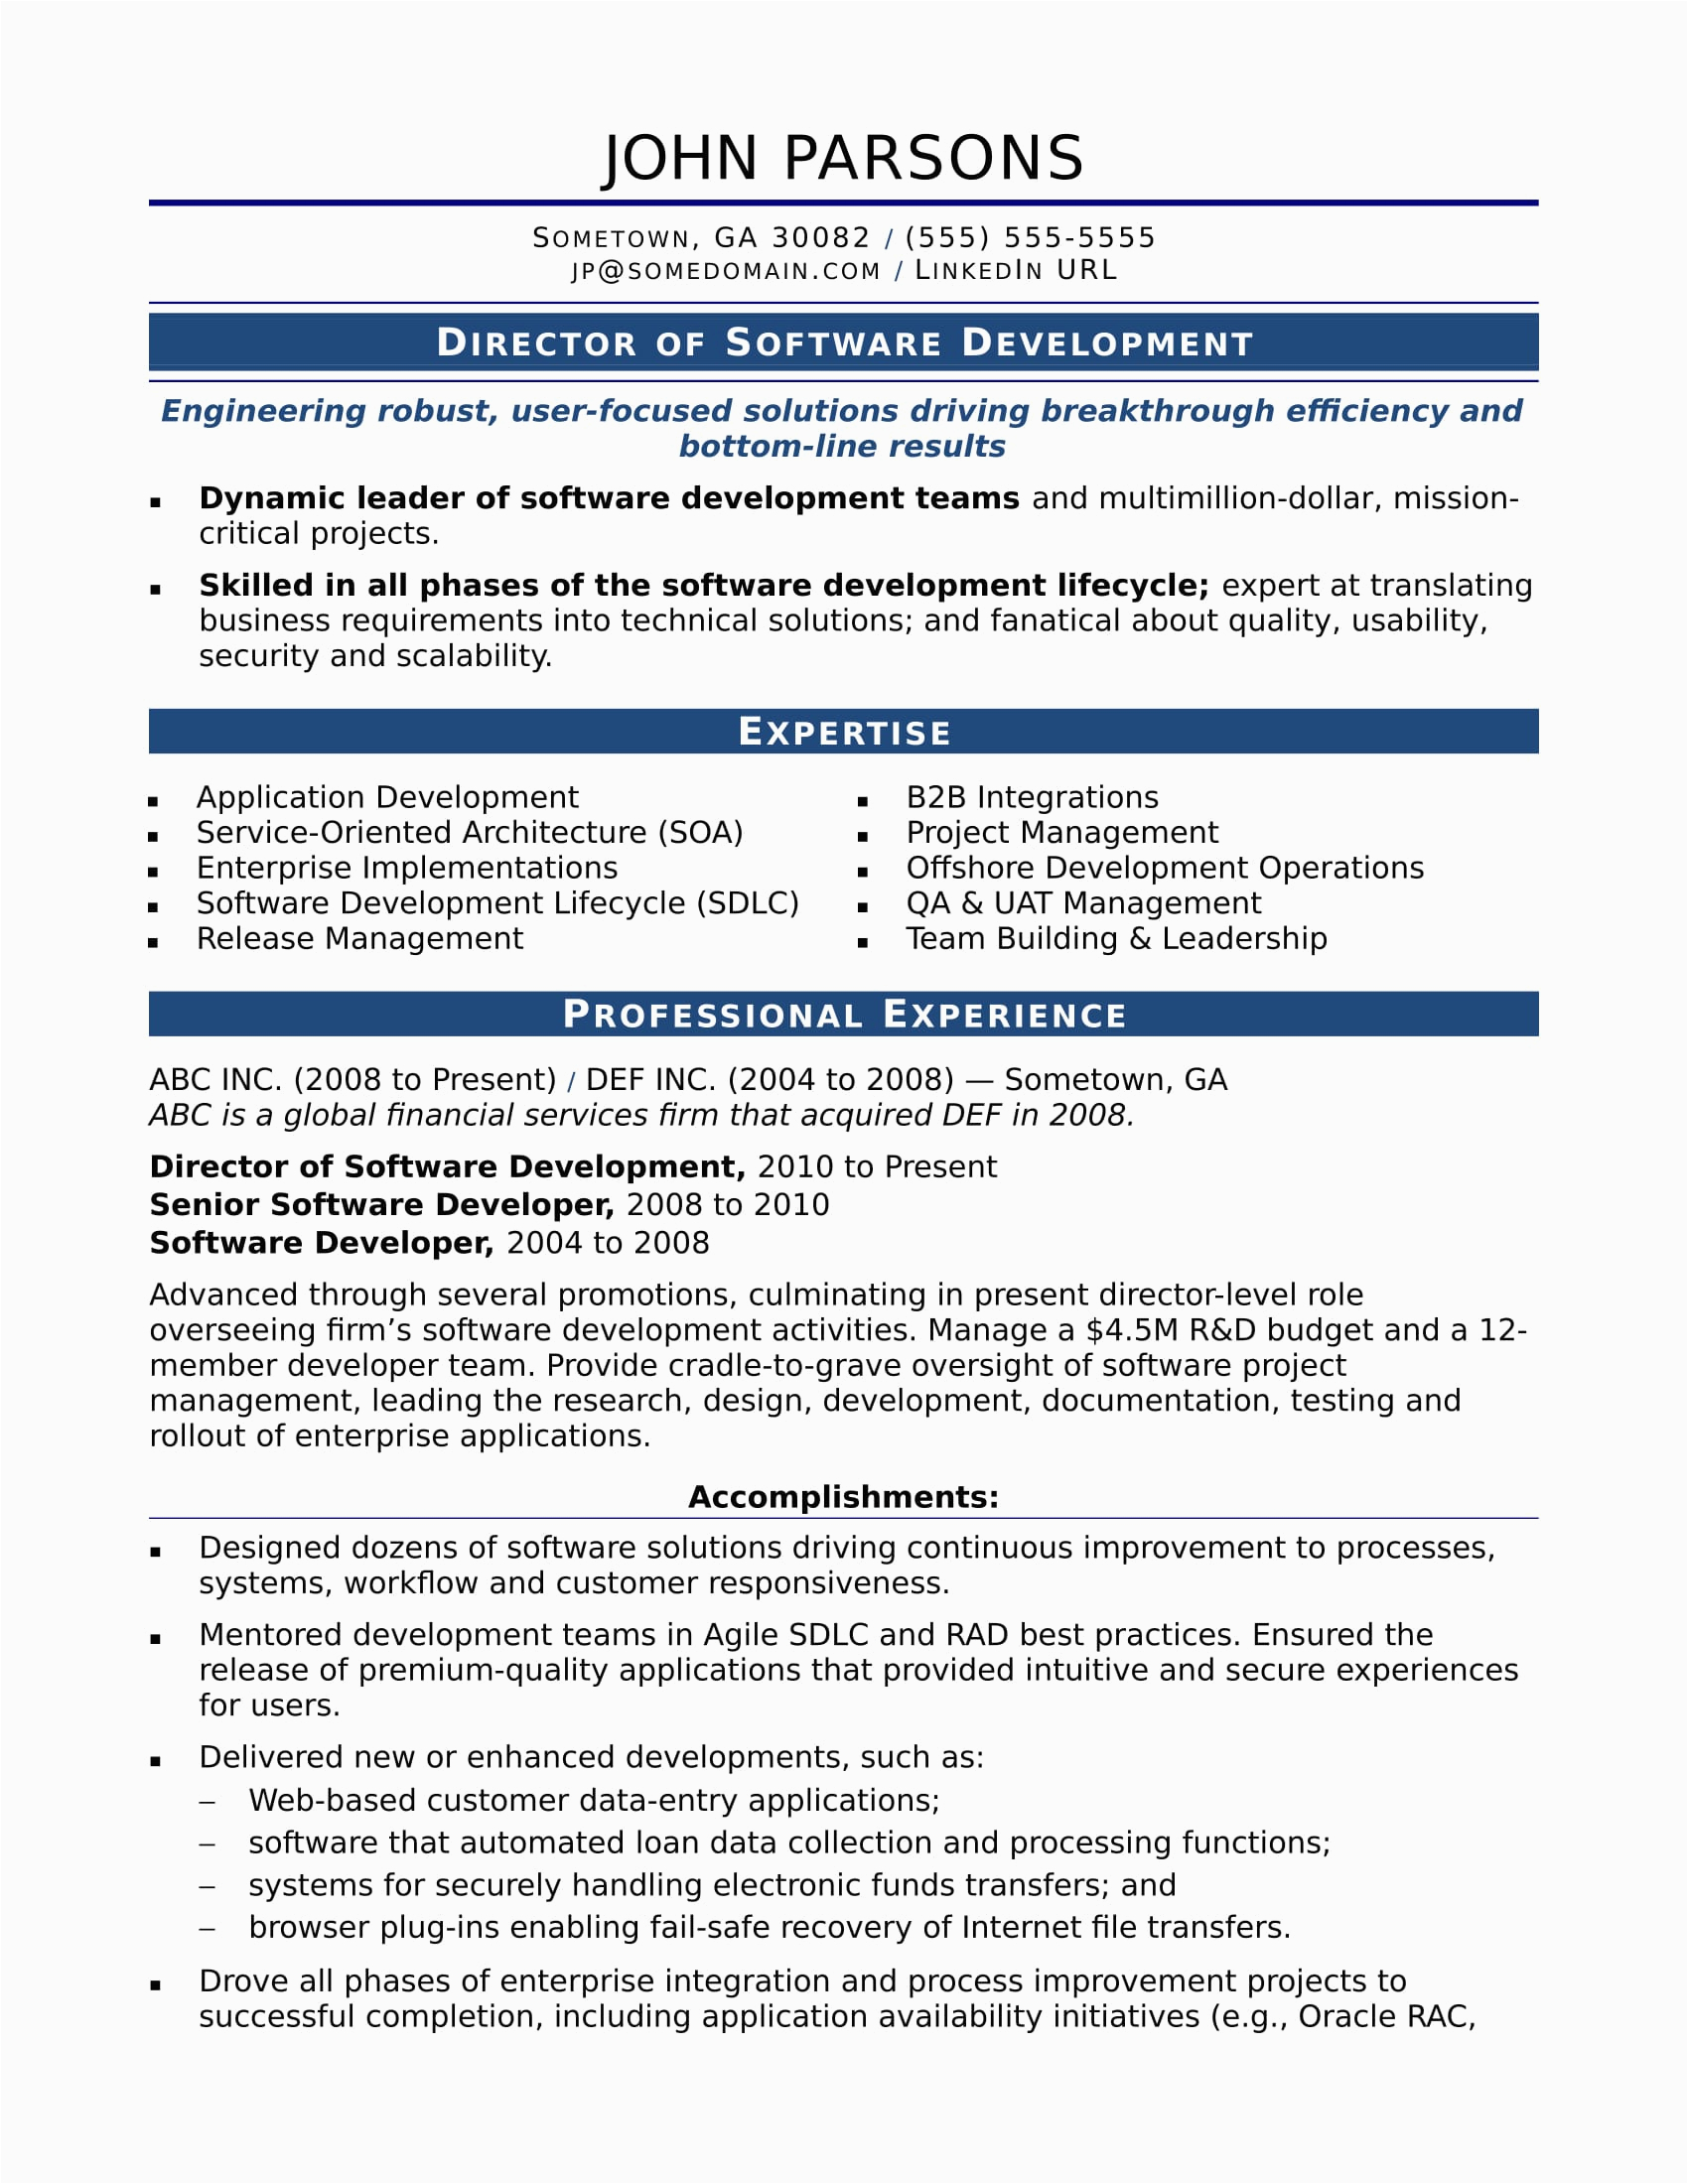 Software Developer Resume Template Free Download Sample Resume for An Experienced It Developer